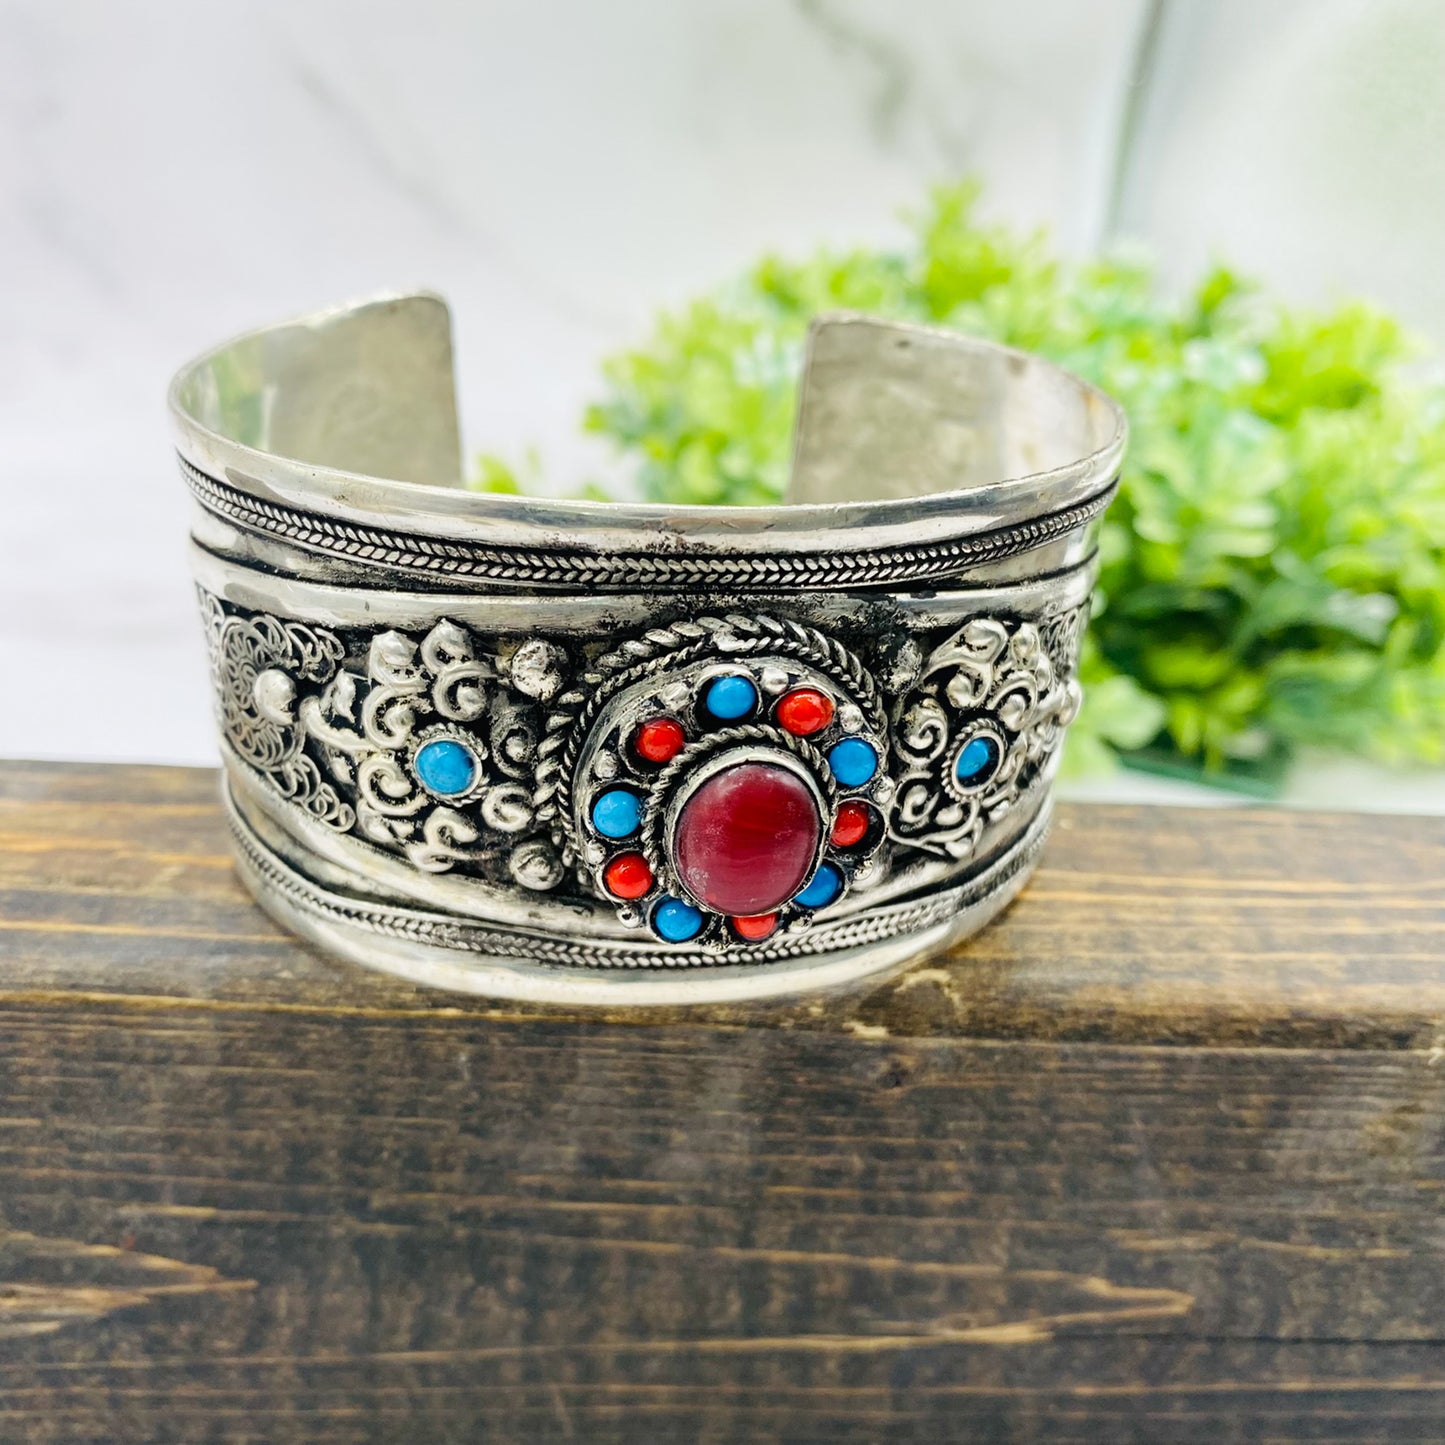 Wide Cuff Bracelet with Gemstone, Handmade Ethnic Silver Bracelet, Filigree Design Jewelry, Unique Accessories, Gift for Her, Hippie Style